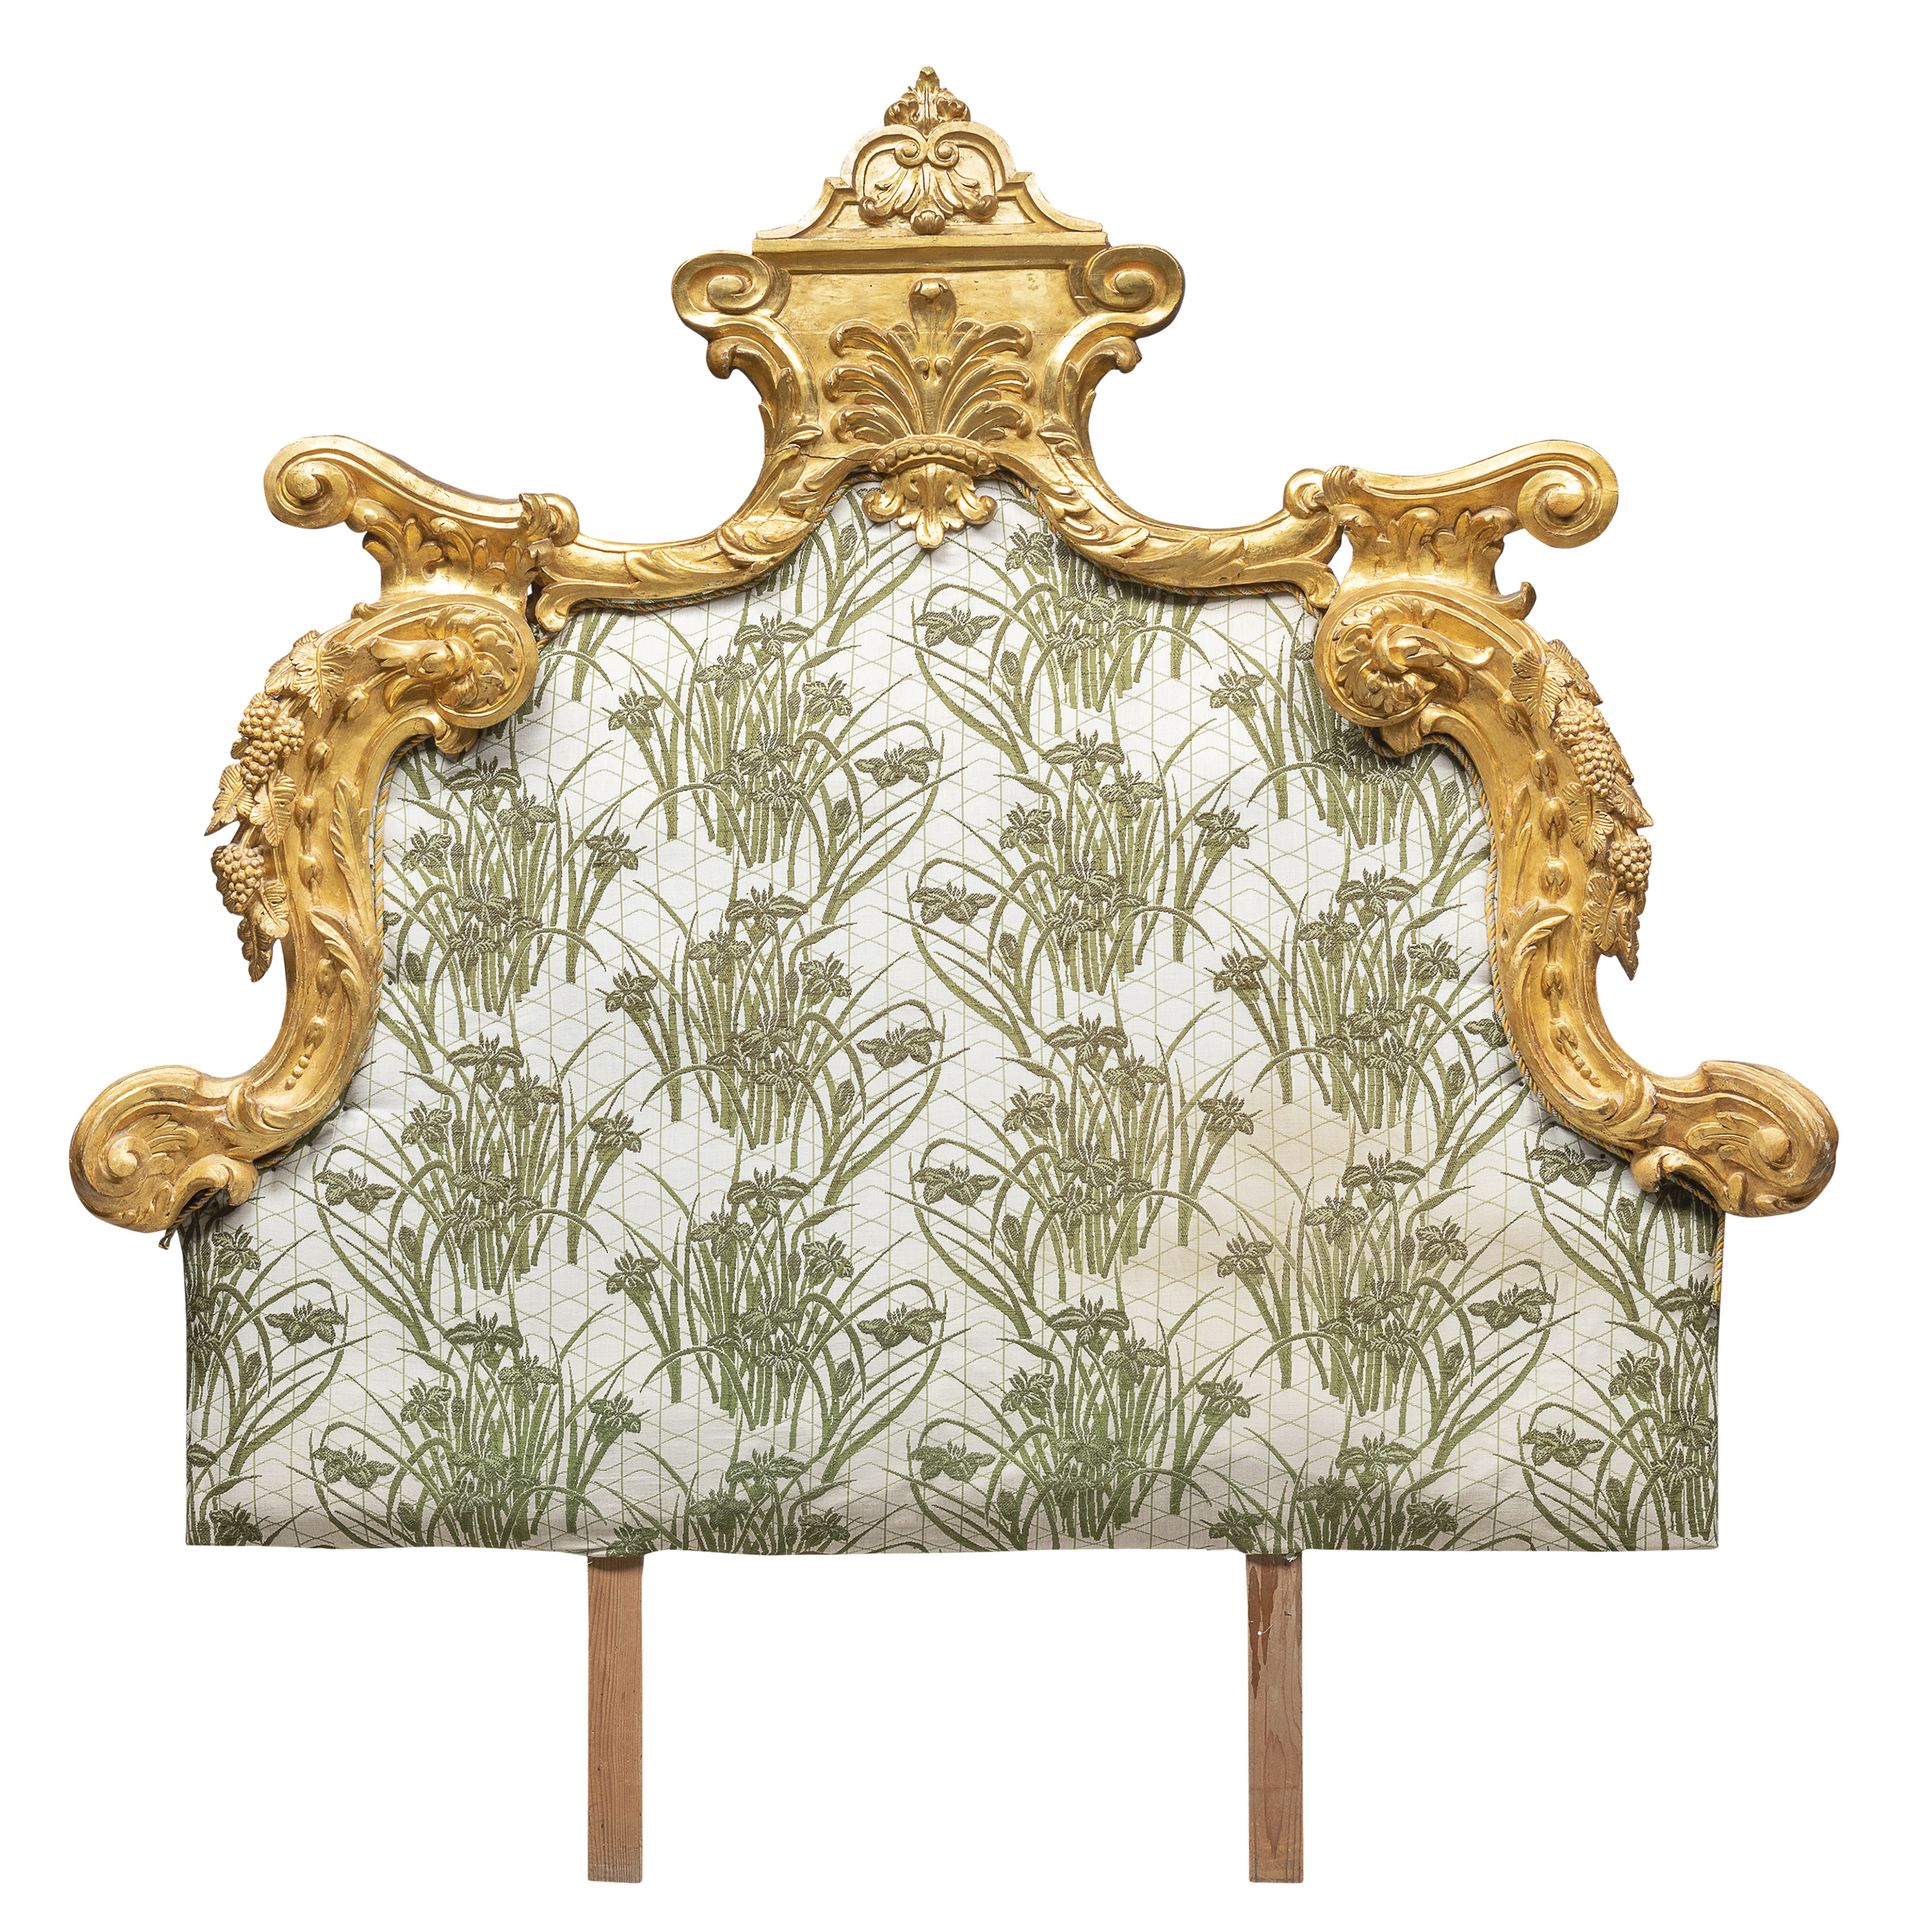 Null BED HEAD IN GILTWOOD, 18th CENTURY